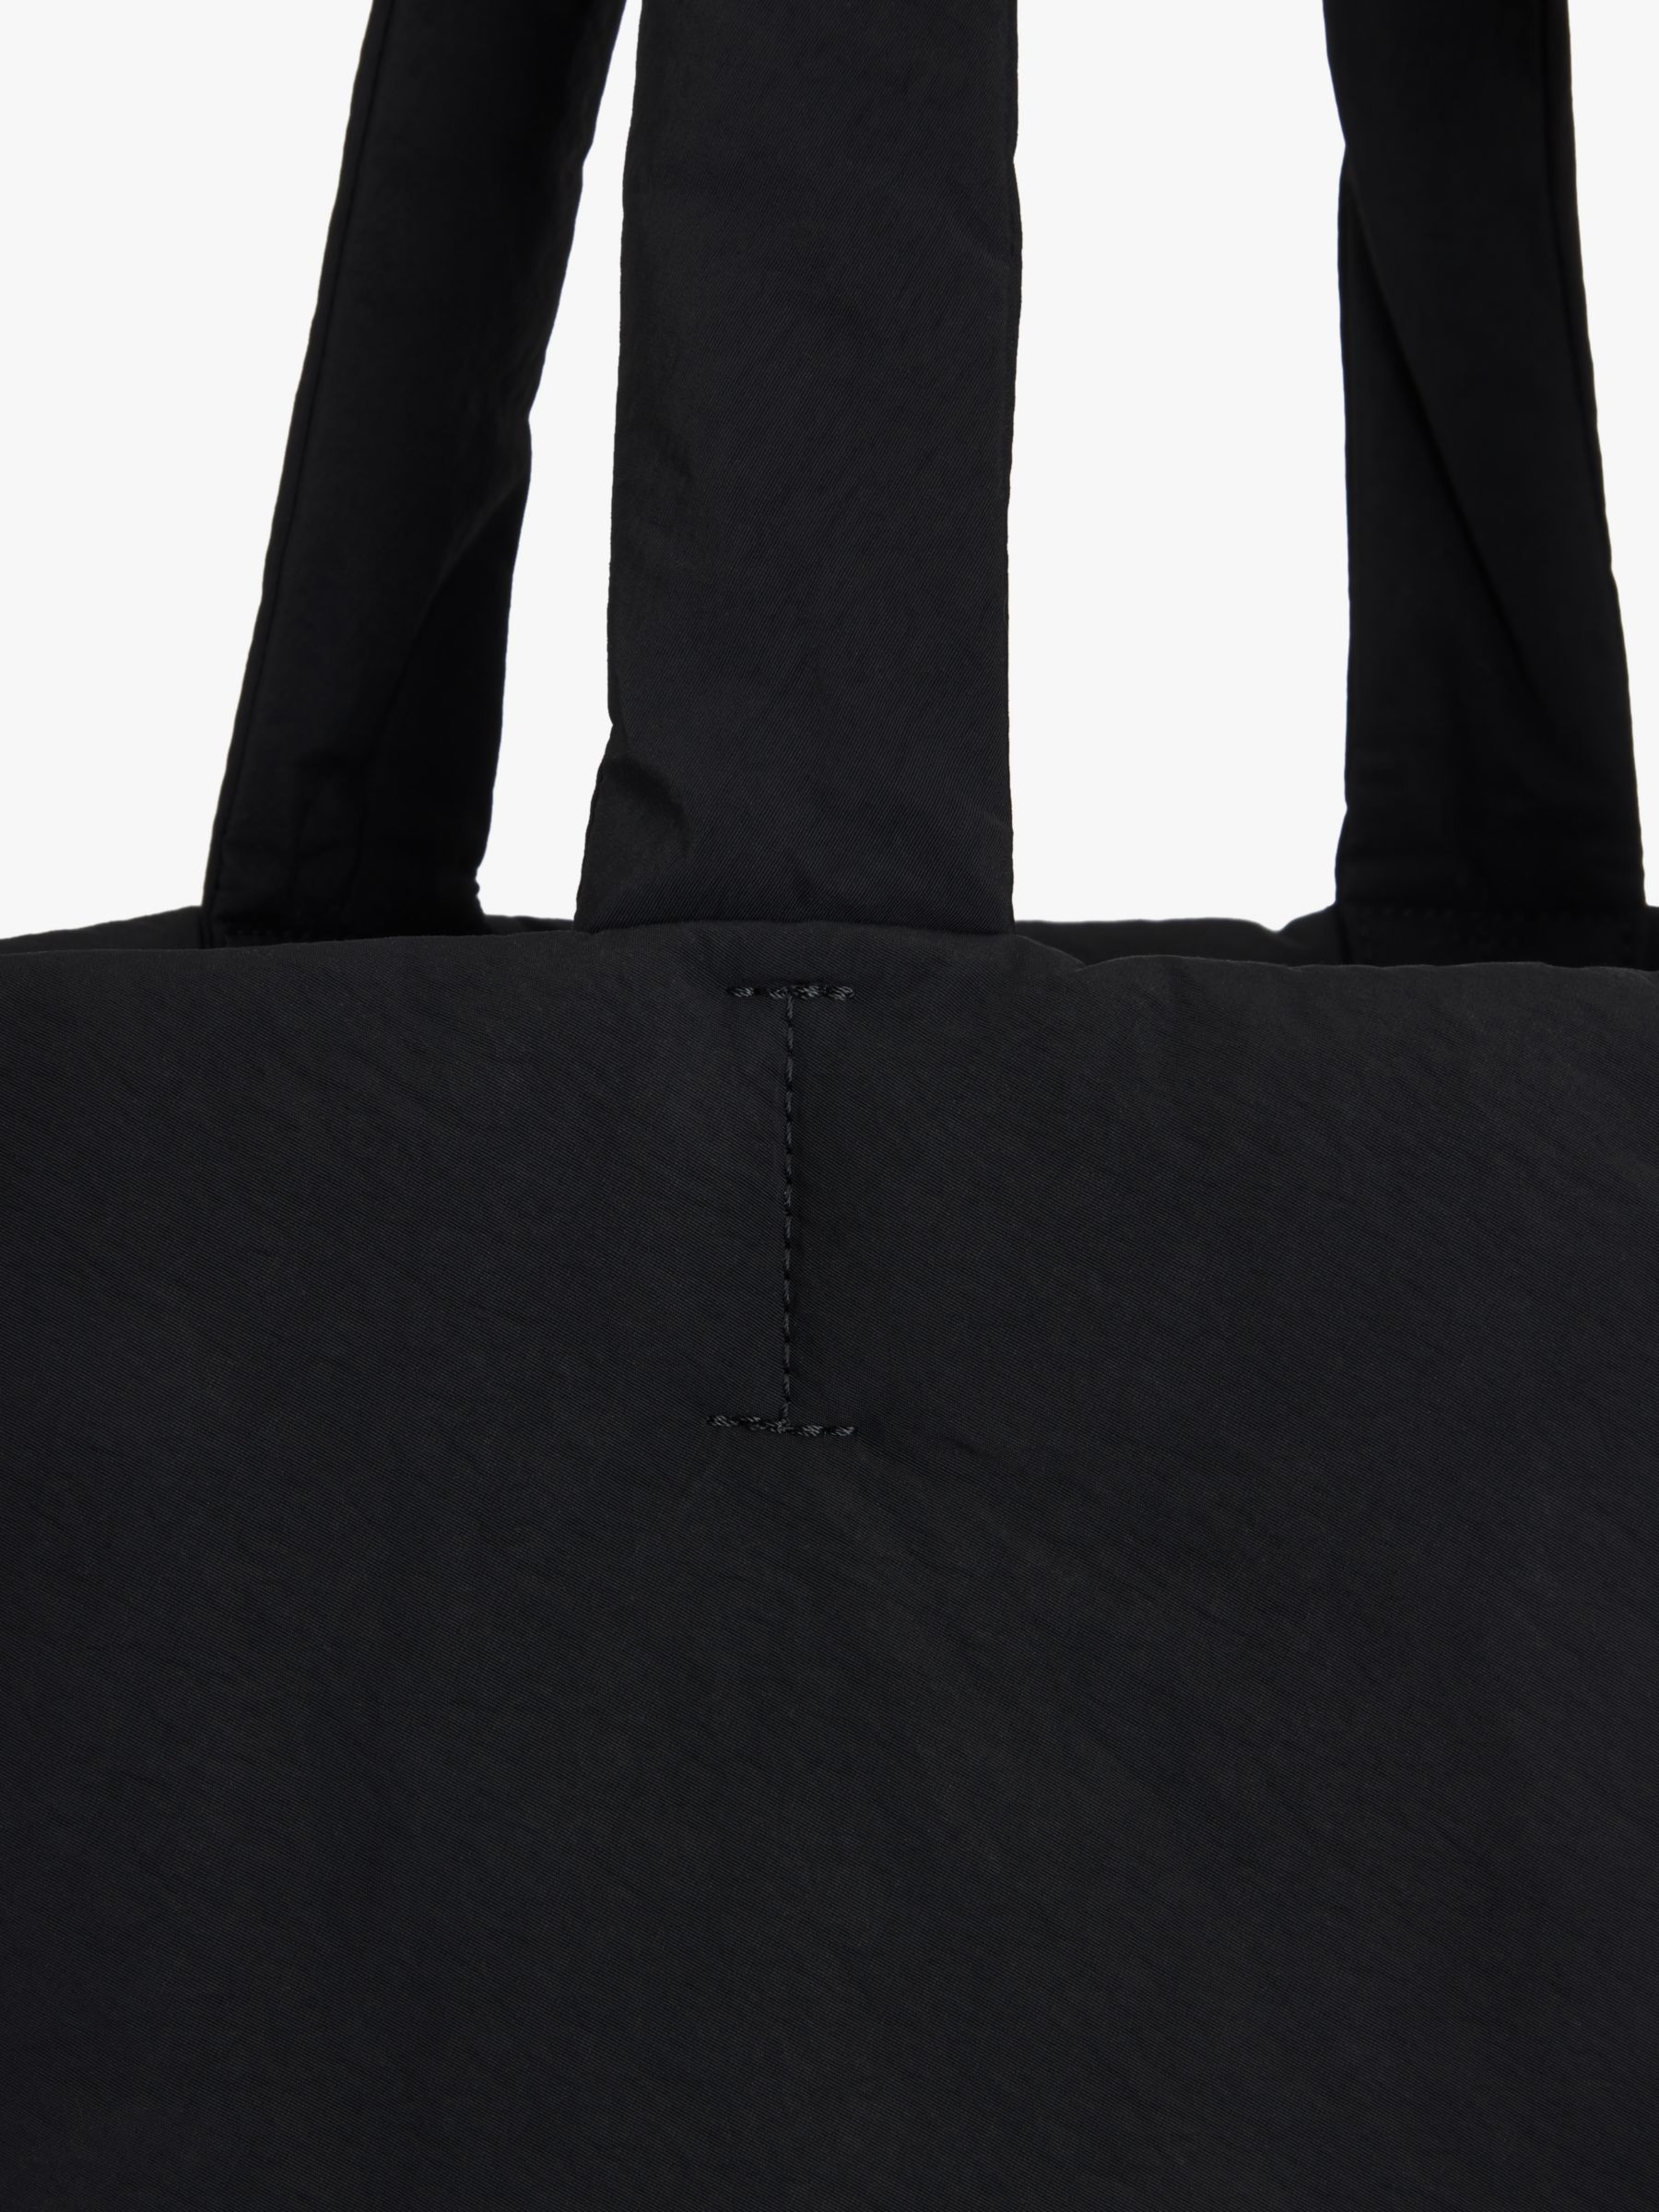 John Lewis ANYDAY Puffy North South Tote Bag, Black